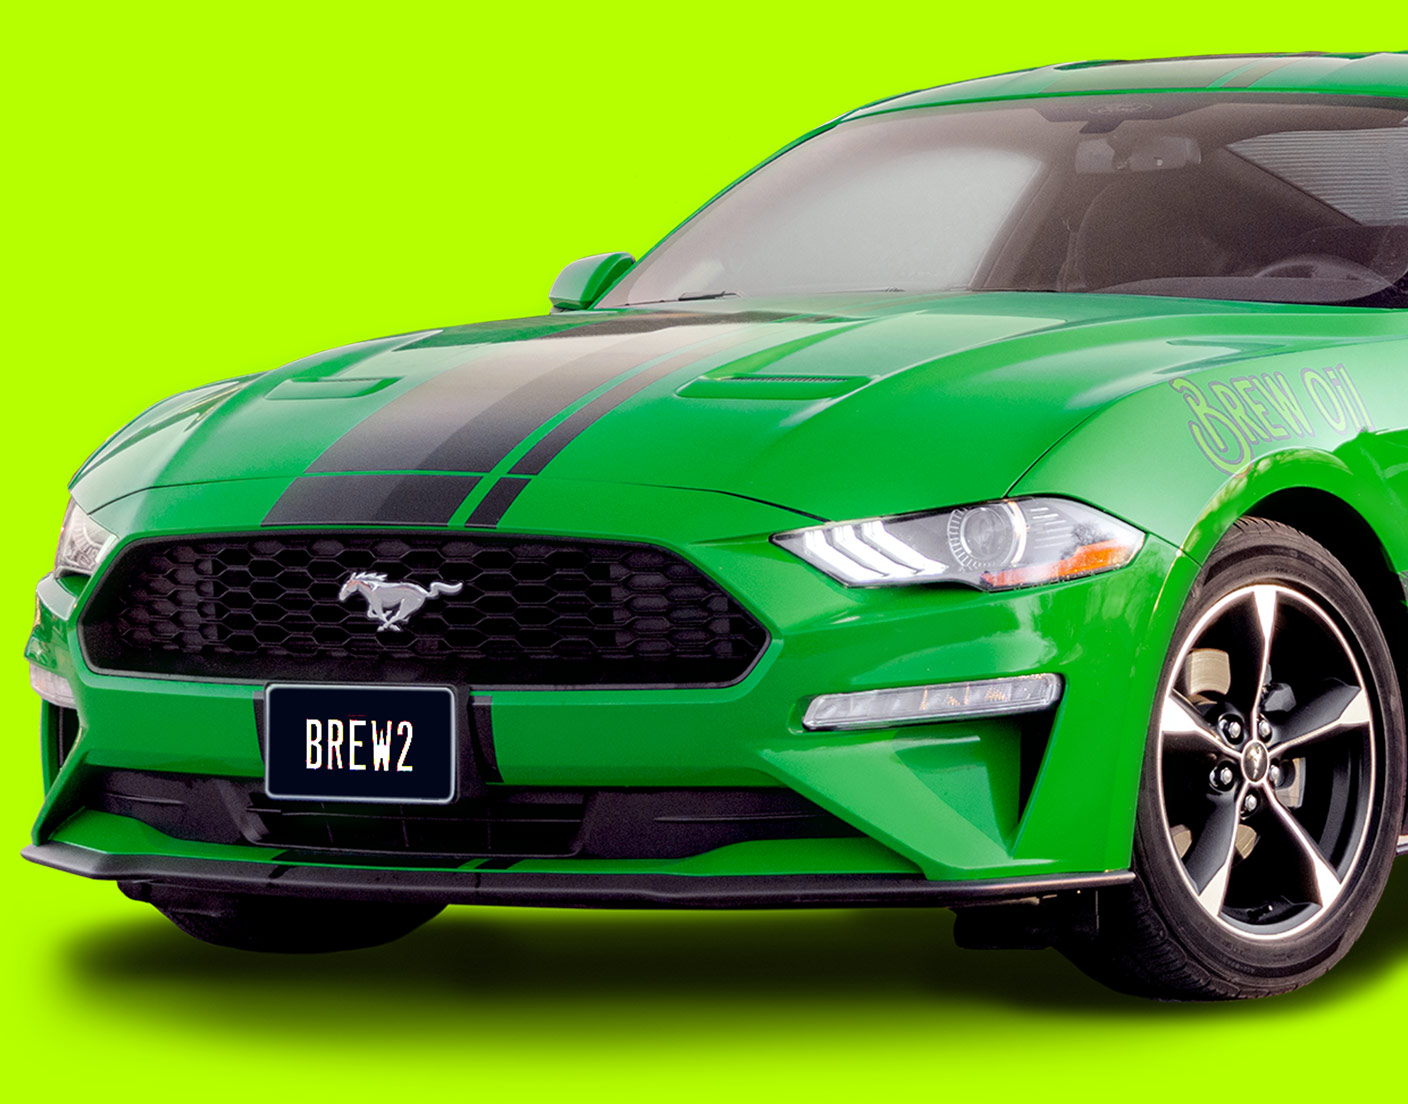 Bright green Mustang at a Brew gas station